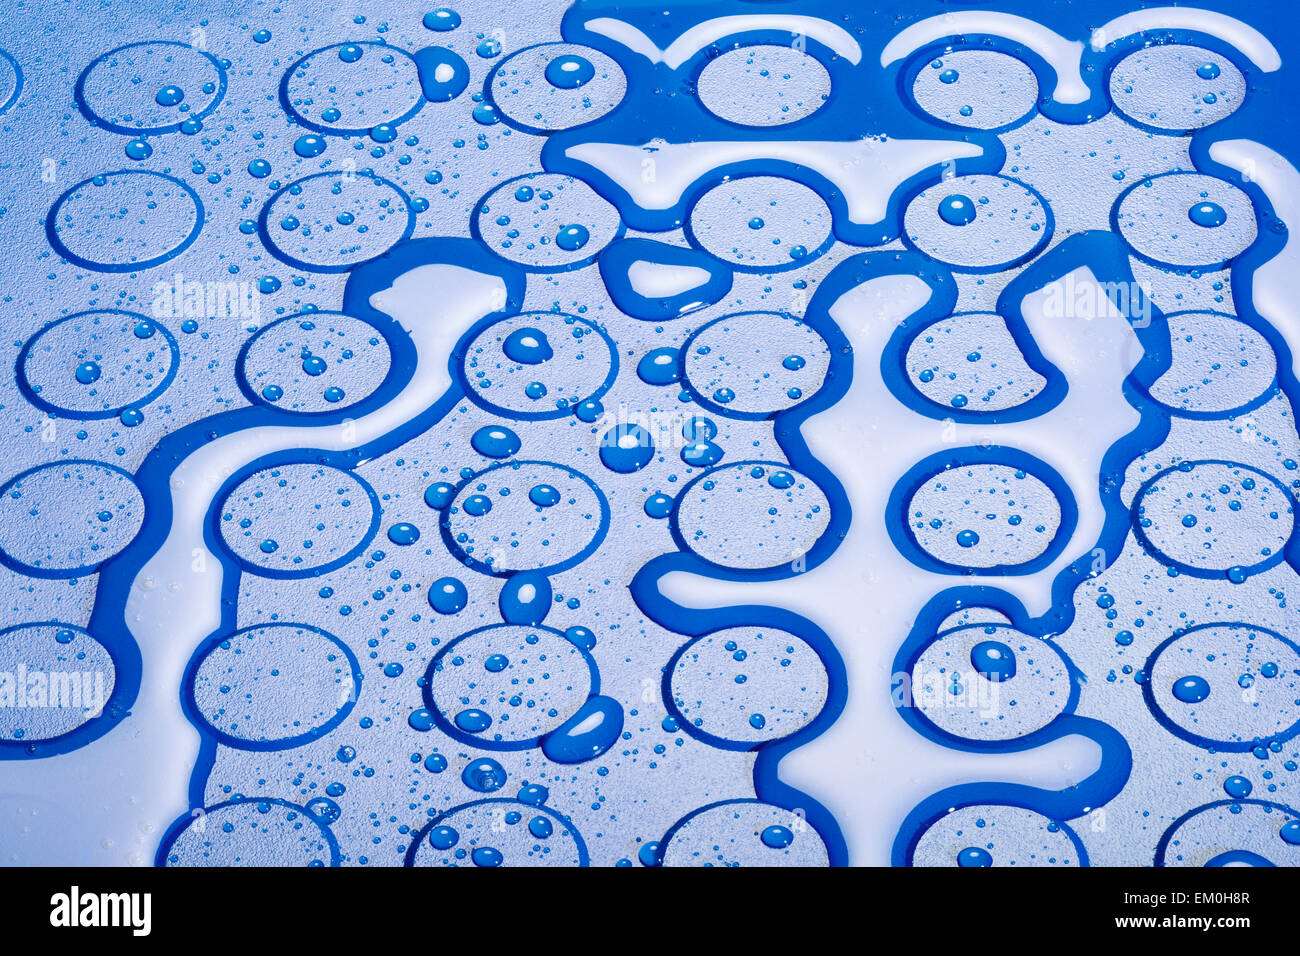 water drops and puddles on a studded vinyl flooring Stock Photo